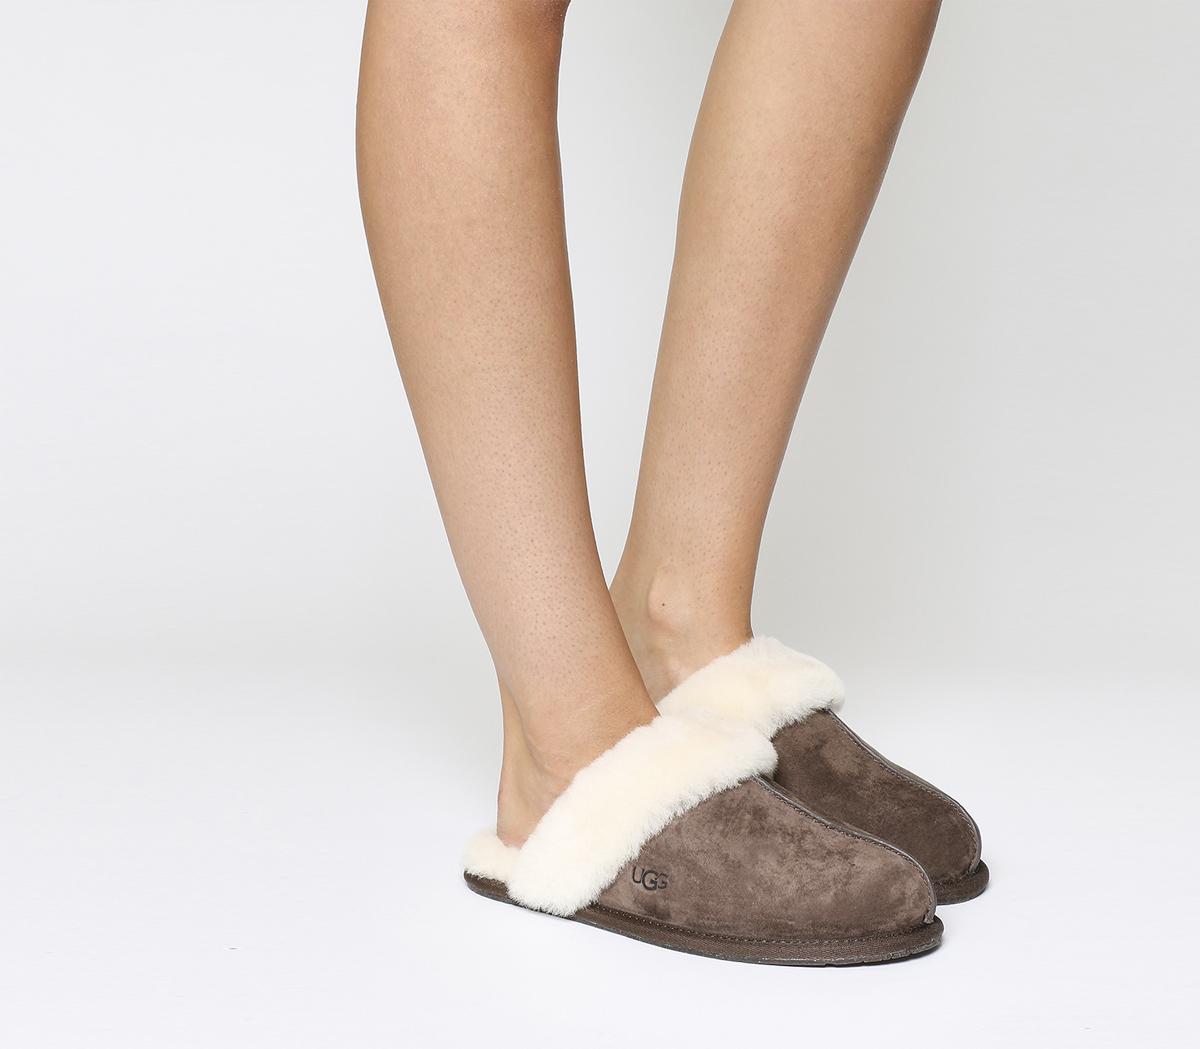 the ugg slippers